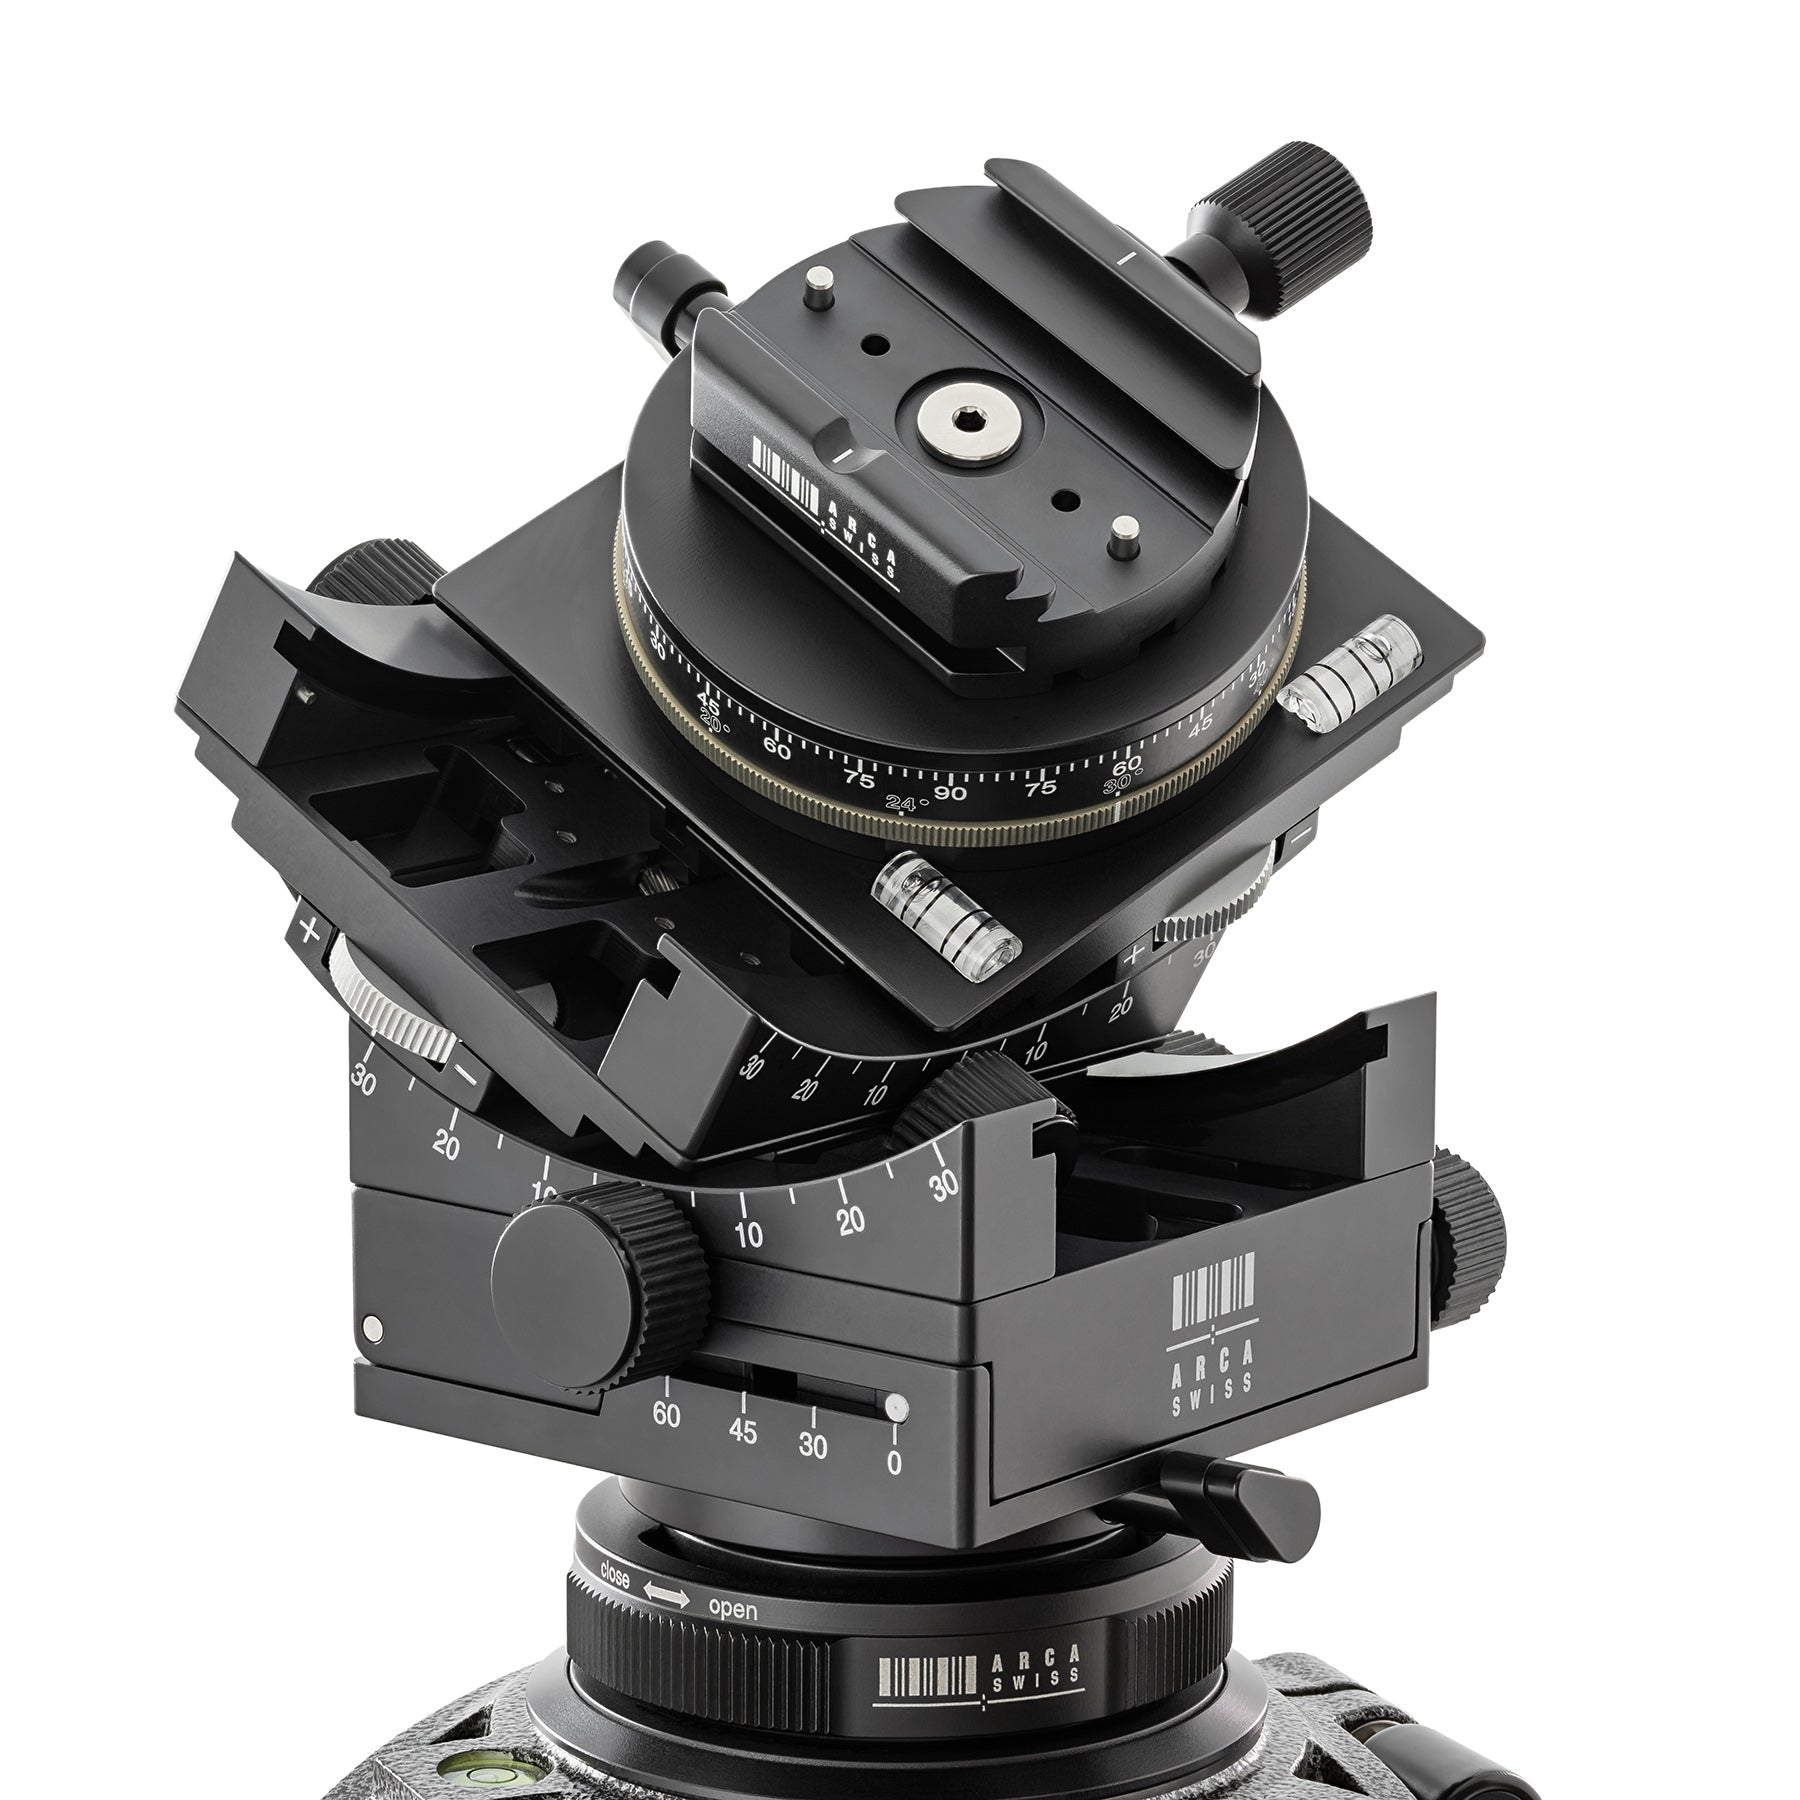 Arca-Swiss C1 Cube cp geared tripod head with Classic quick release, showing C1 Cube cp mounted on a tripod, 3/4 front view photograph, clicPan model 8501503.1